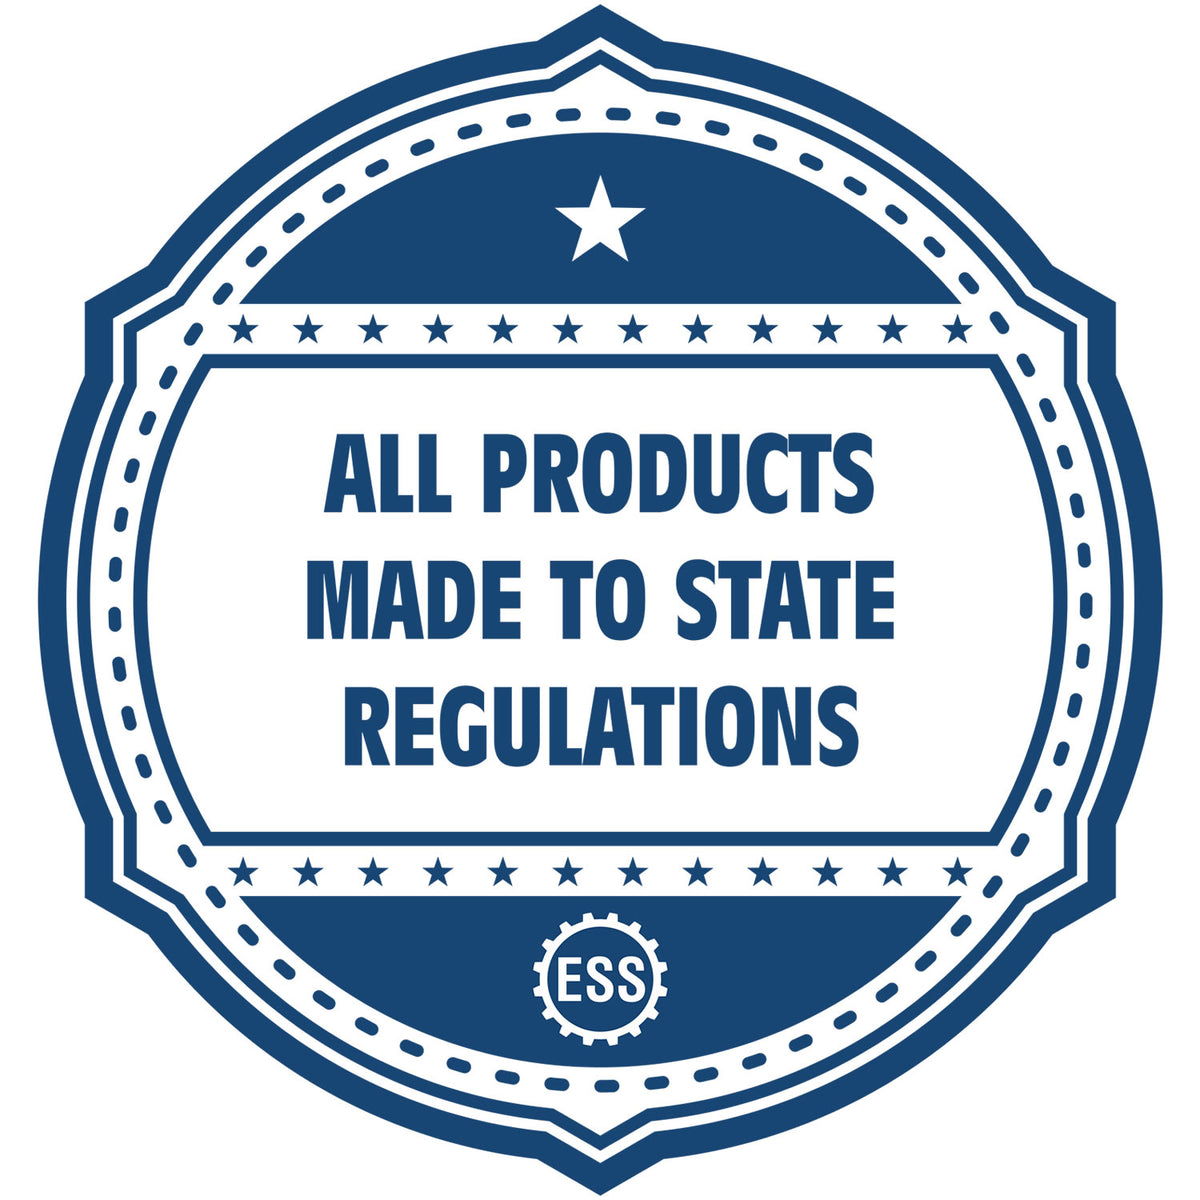 An icon or badge element for the New Hampshire Engineer Desk Seal showing that this product is made in compliance with state regulations.